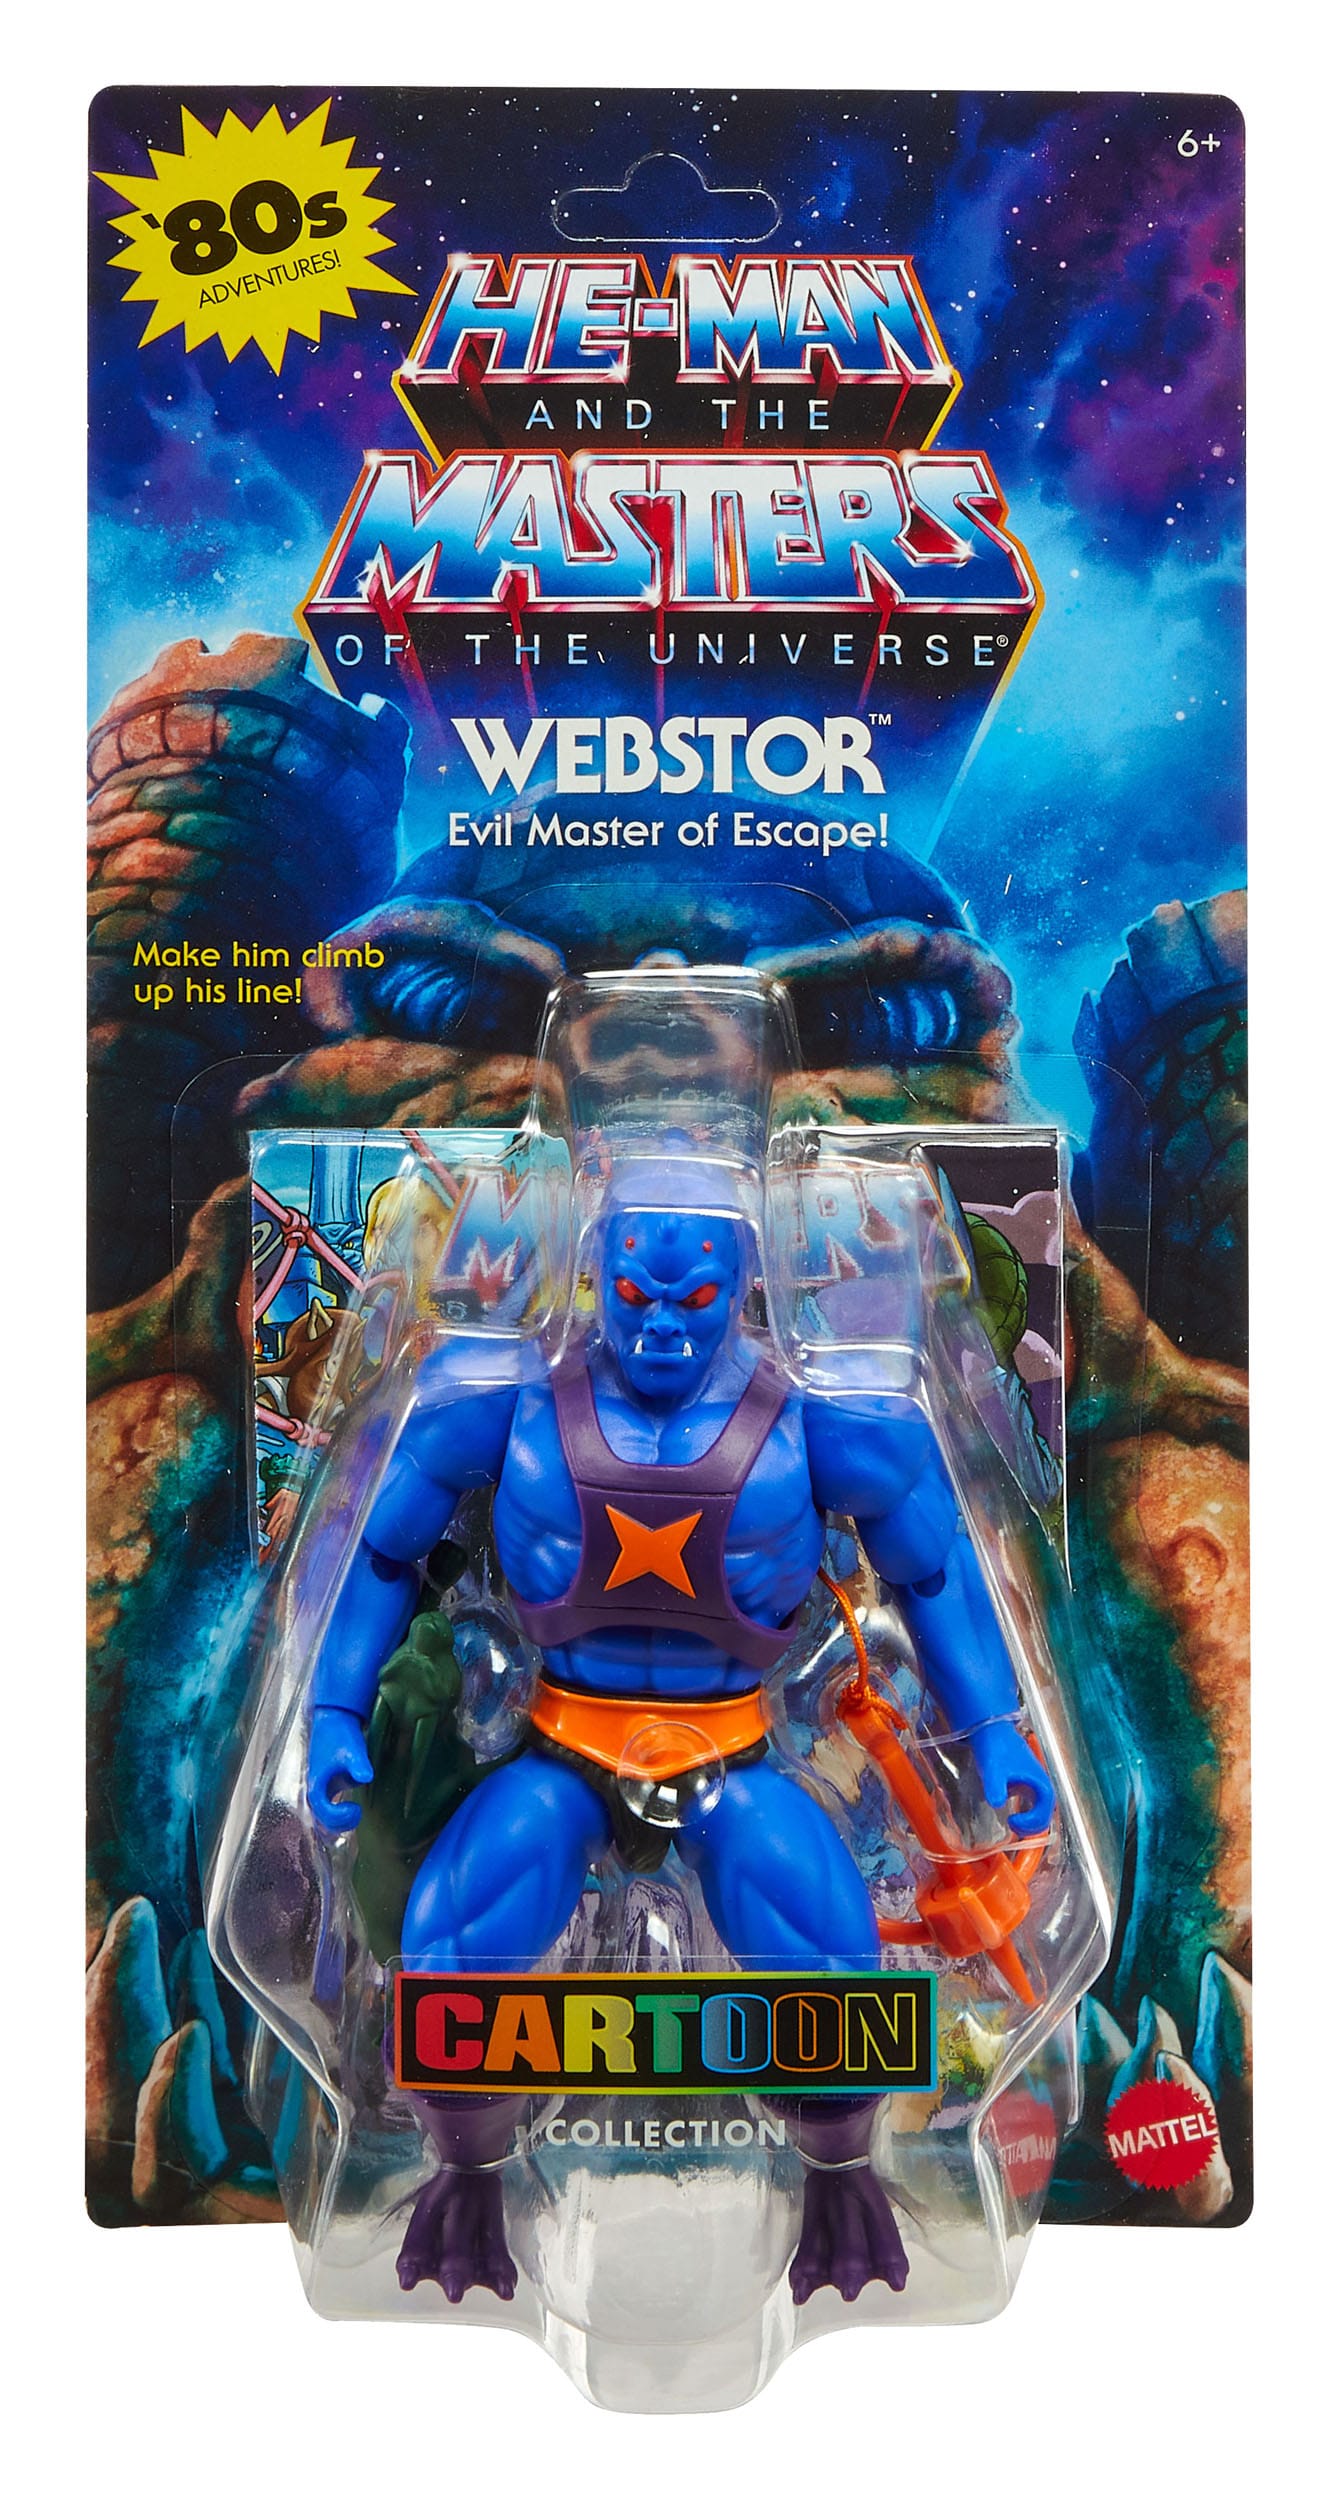 Masters of the Universe Origins Actionfigur Cartoon Collection Webstor 14 cm MATTHYD36 194735244263